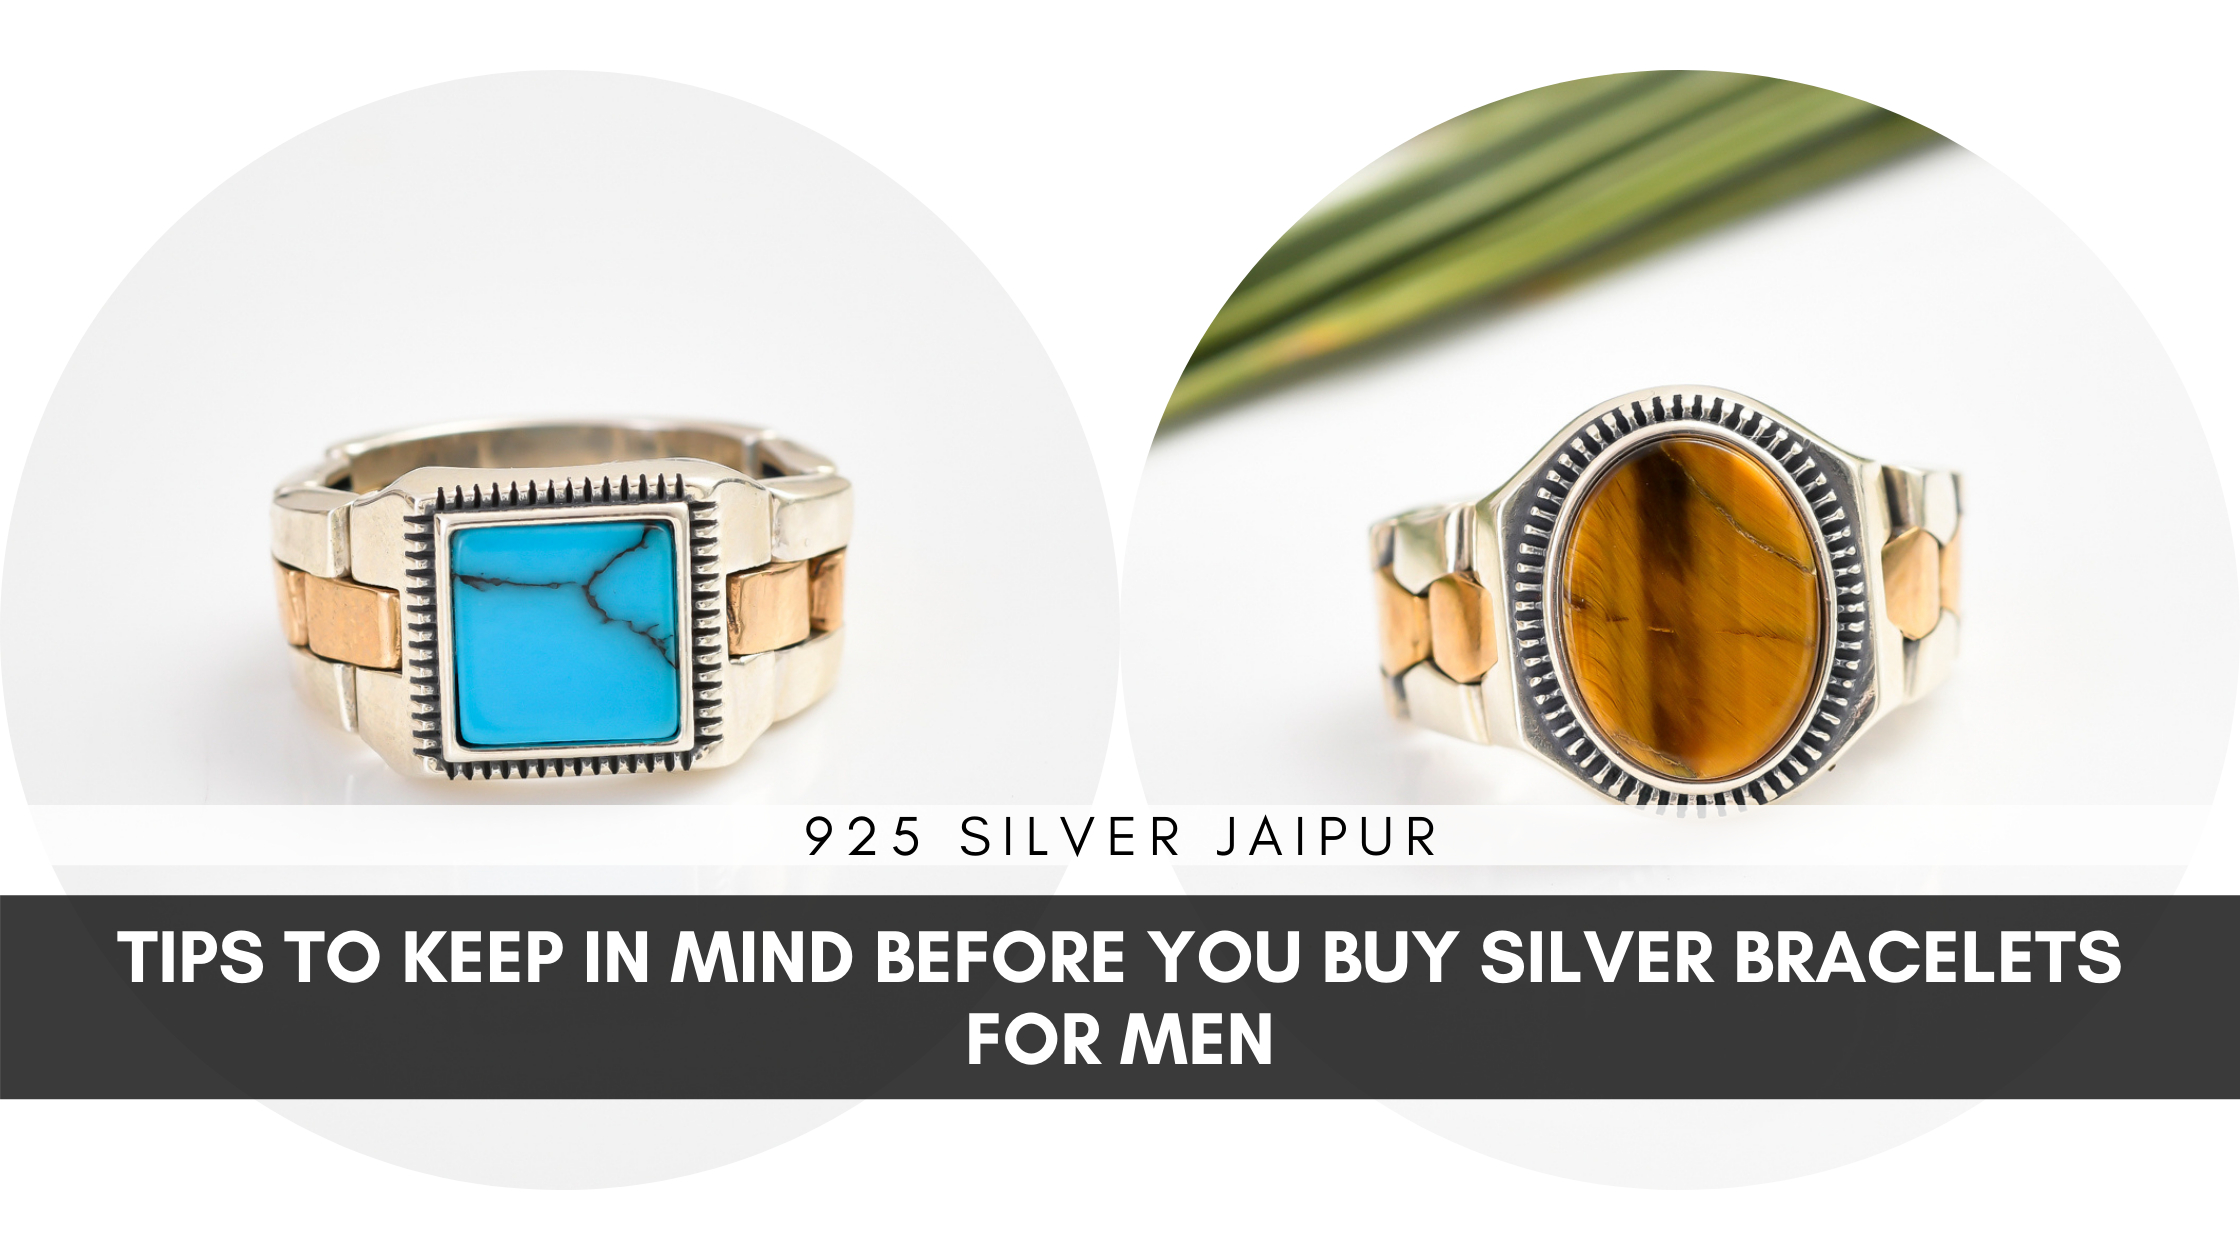 Tips To Keep In Mind Before You Buy Silver Bracelets For Men